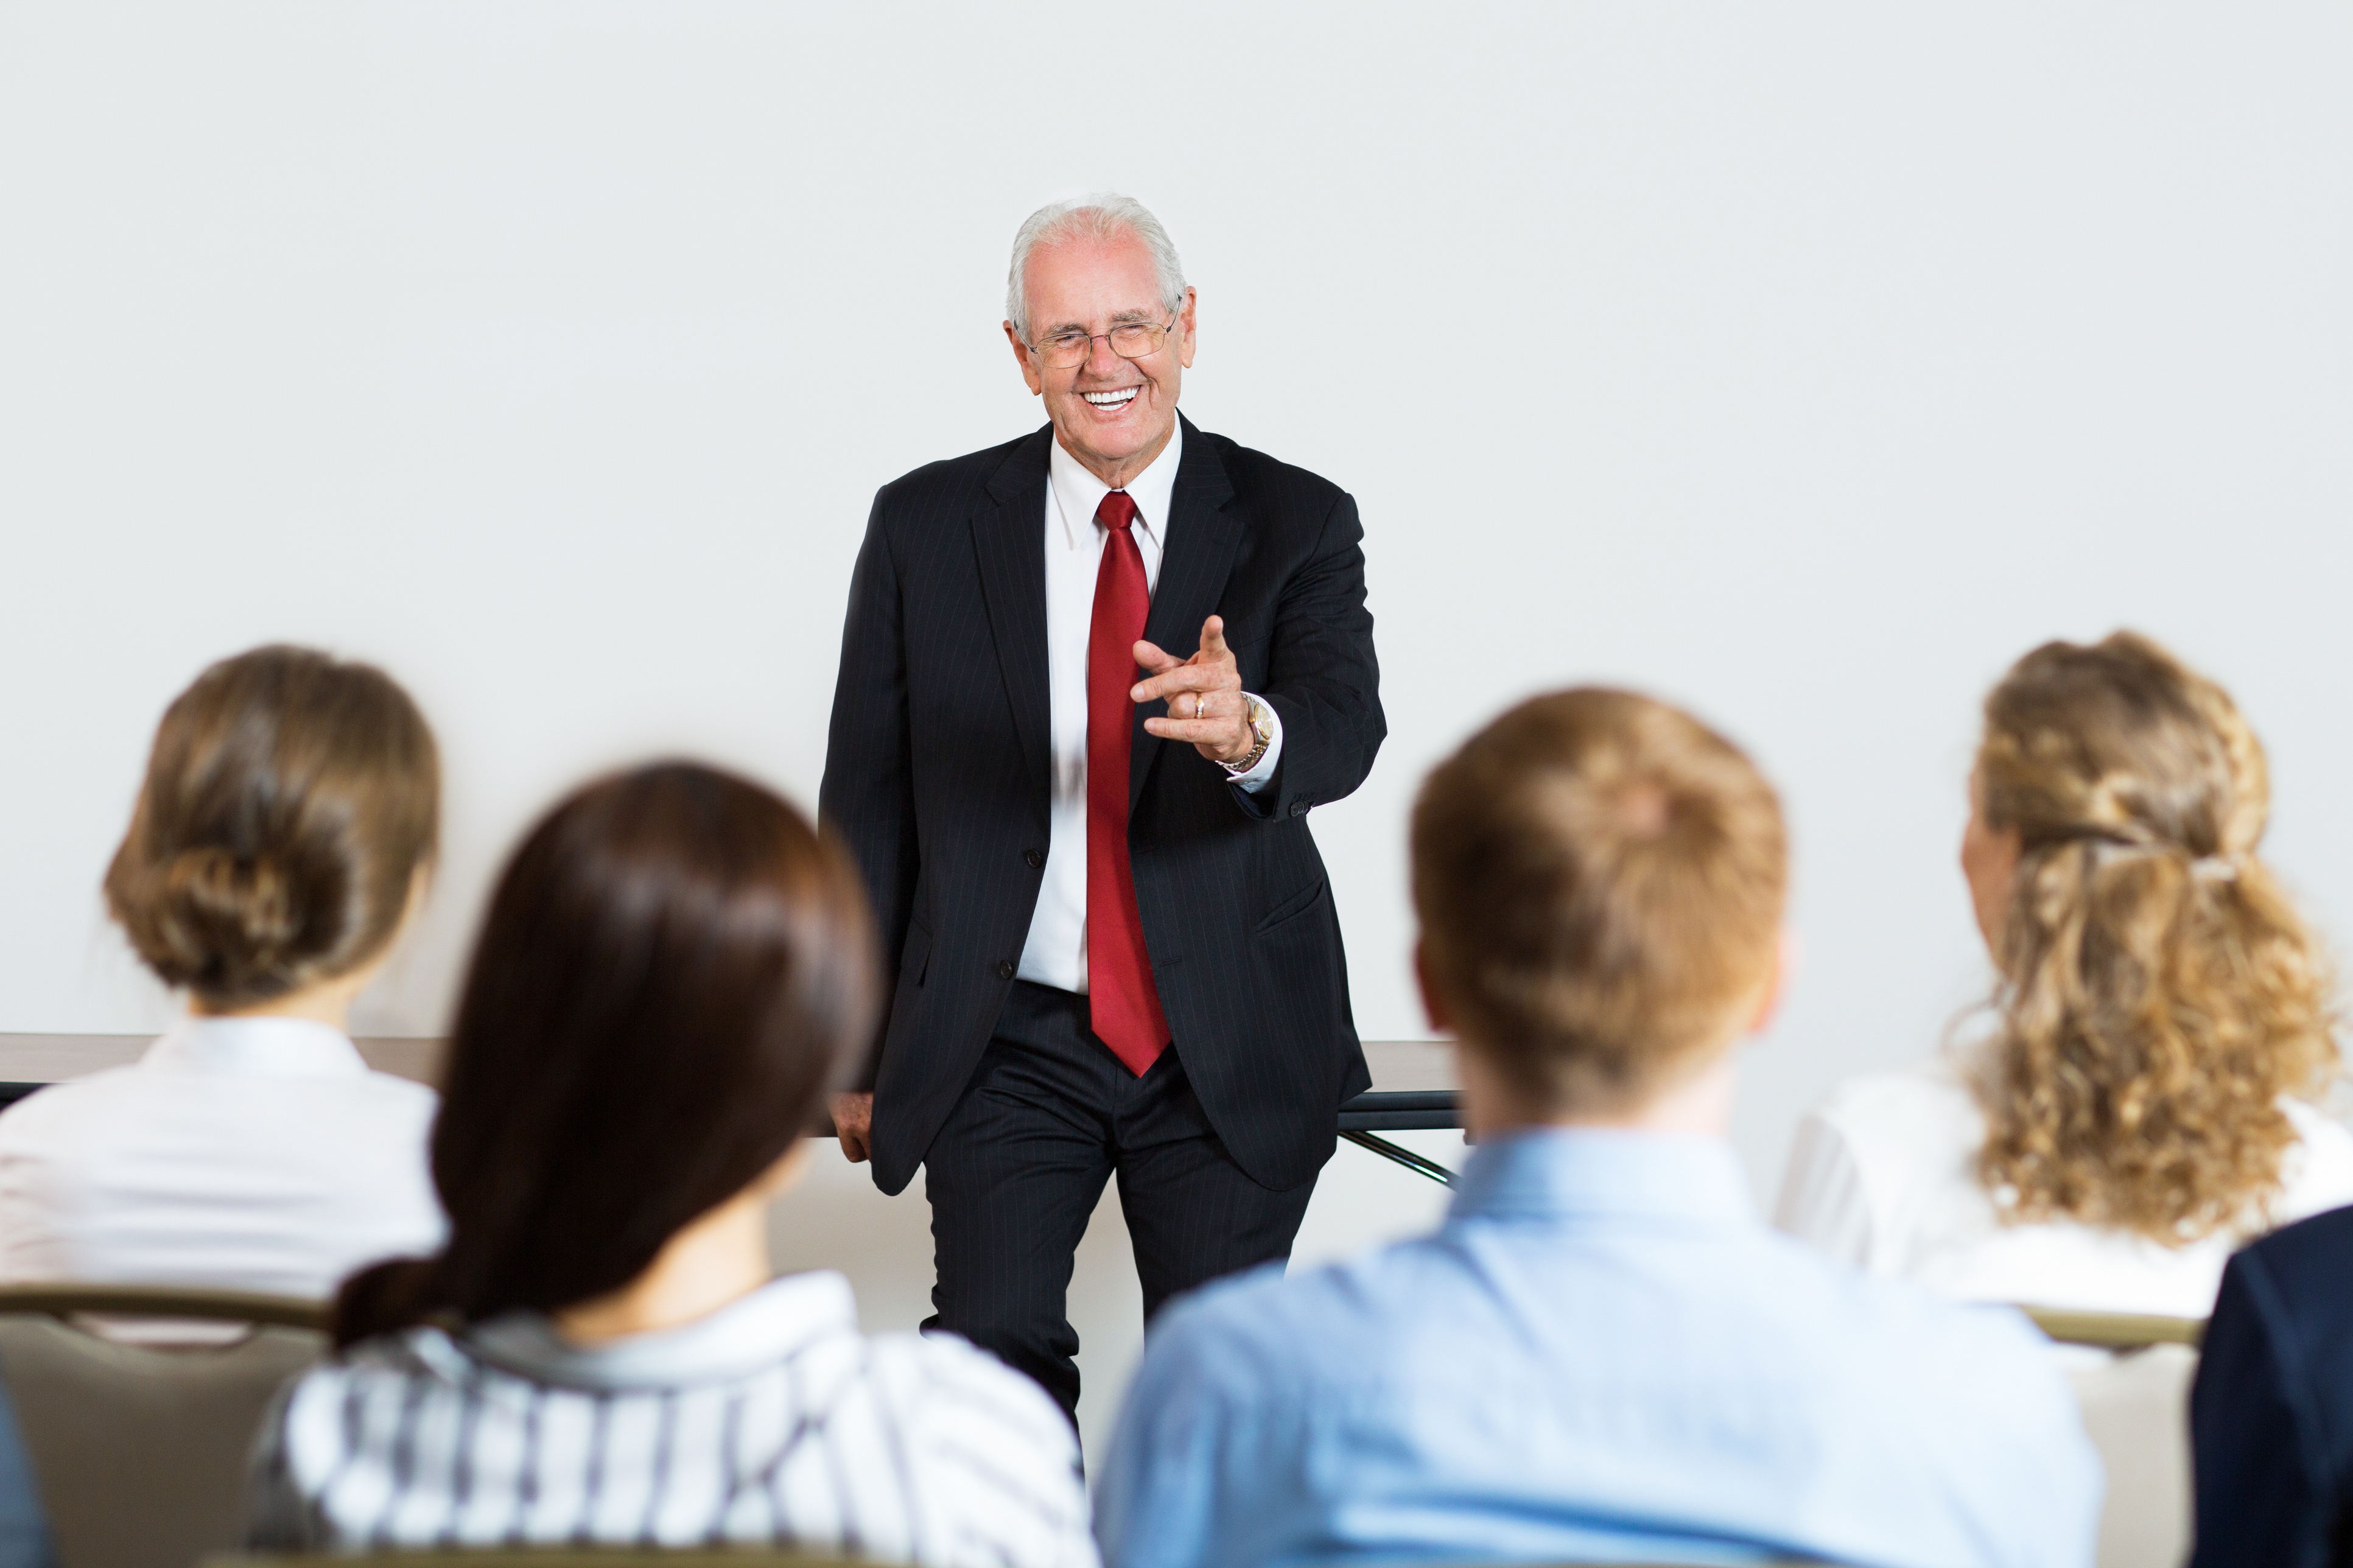 Smiling senior businessman leaning on table and pointing to sitting audience of four people. Rear view of audience.